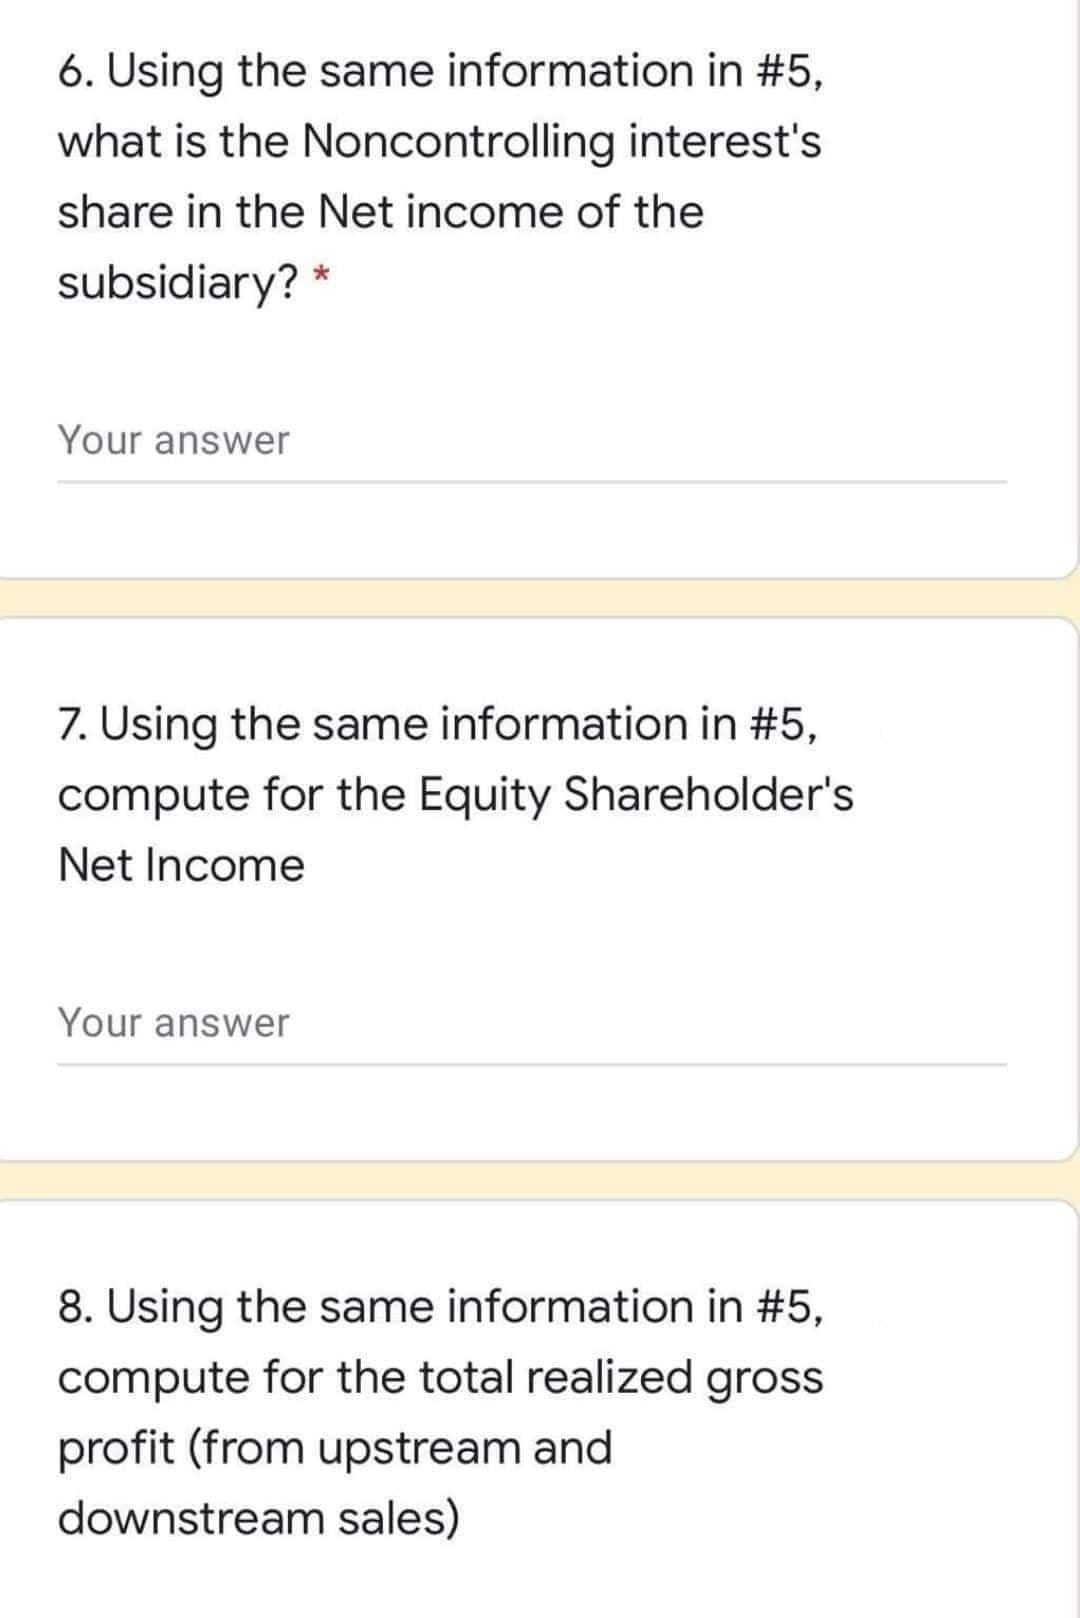 6. Using the same information in #5,
what is the Noncontrolling interest's
share in the Net income of the
subsidiary? *
Your answer
7. Using the same information in #5,
compute for the Equity Shareholder's
Net Income
Your answer
8. Using the same information in #5,
compute for the total realized gross
profit (from upstream and
downstream sales)
